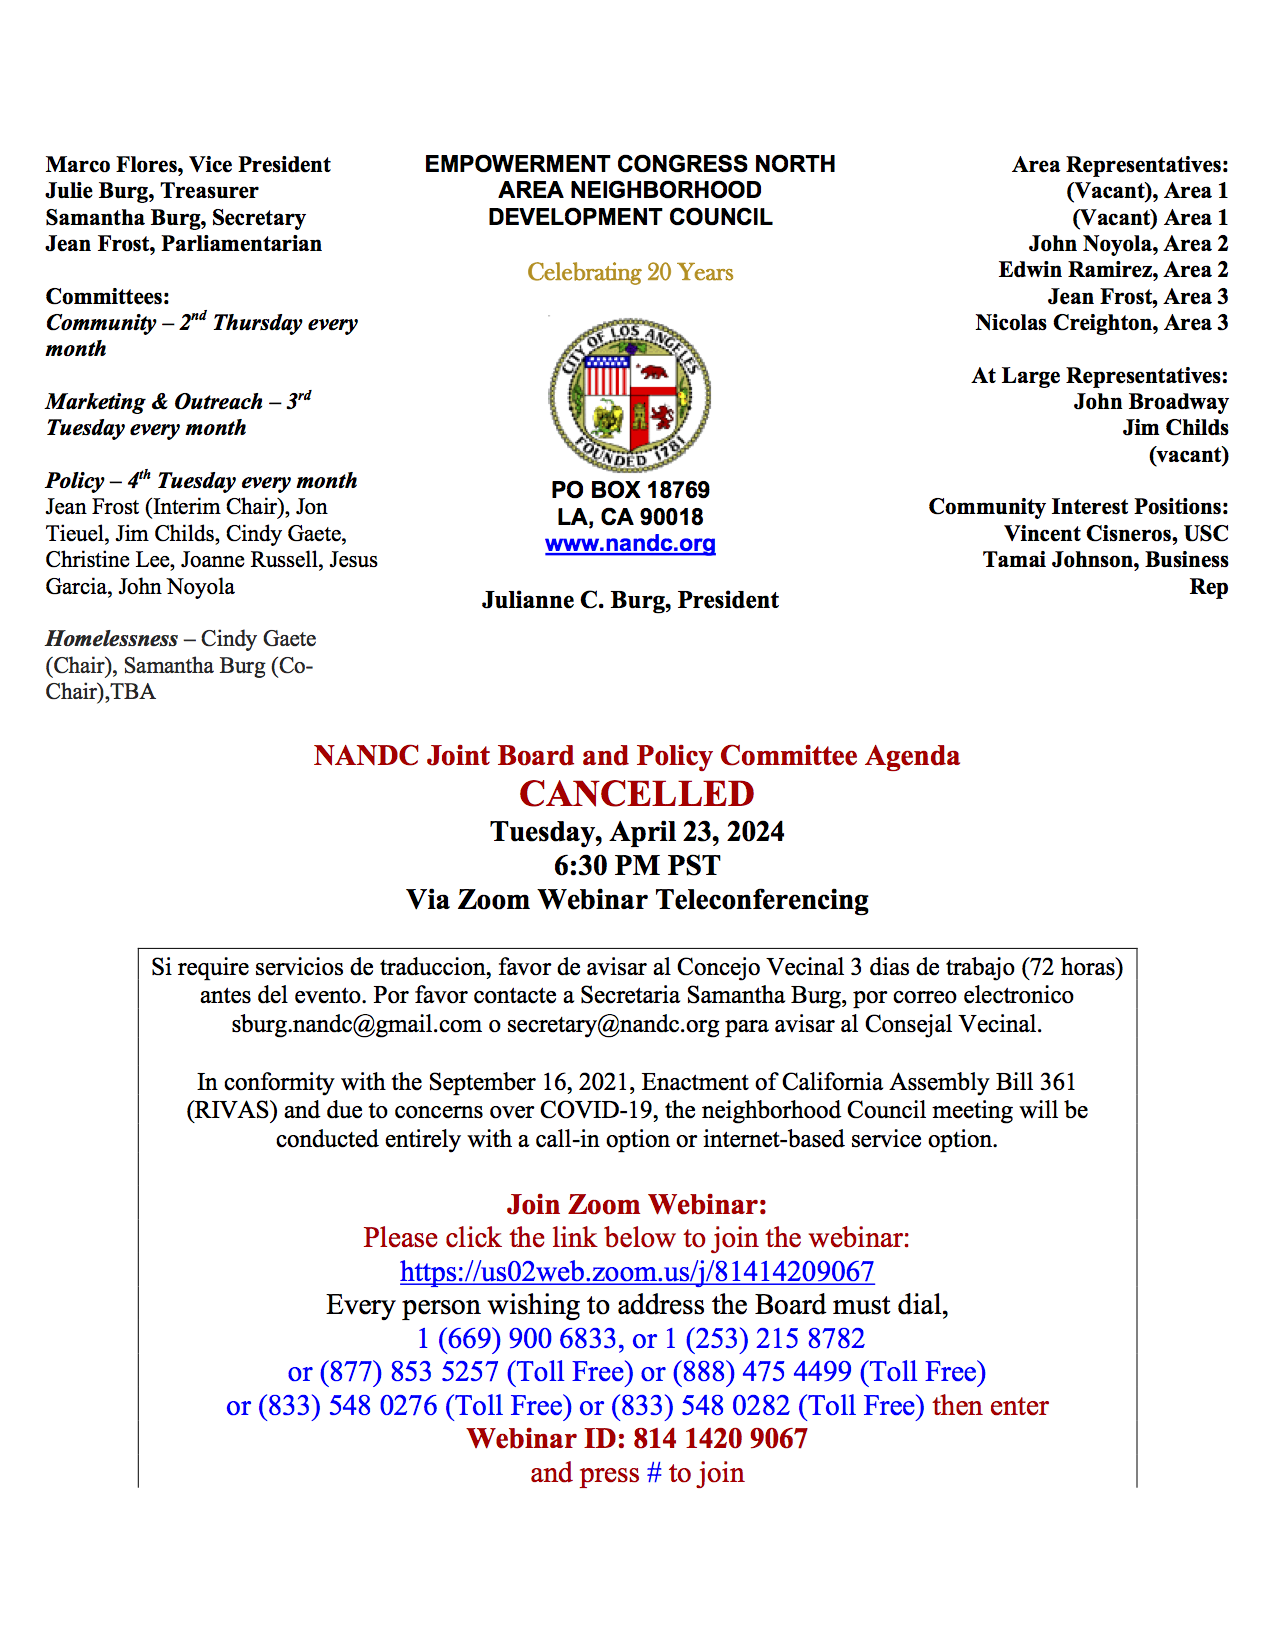 NANDC Joint Board and Policy Committee Agenda - CANCELLED